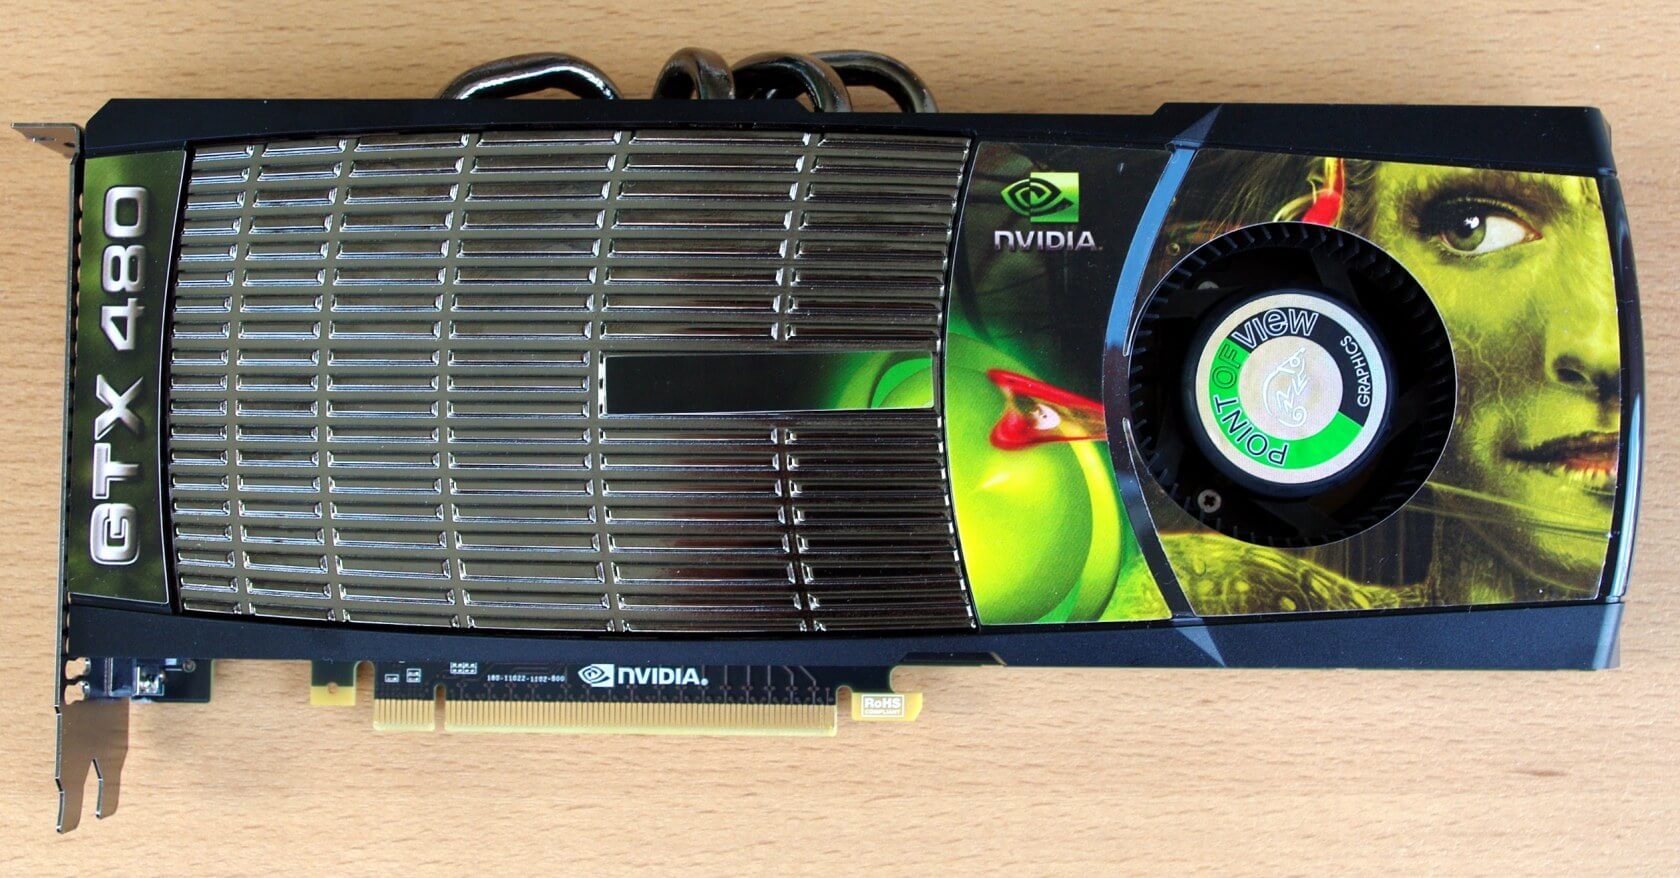 Nvidia ends driver support for Fermi-based GPUs, 32-bit operating systems